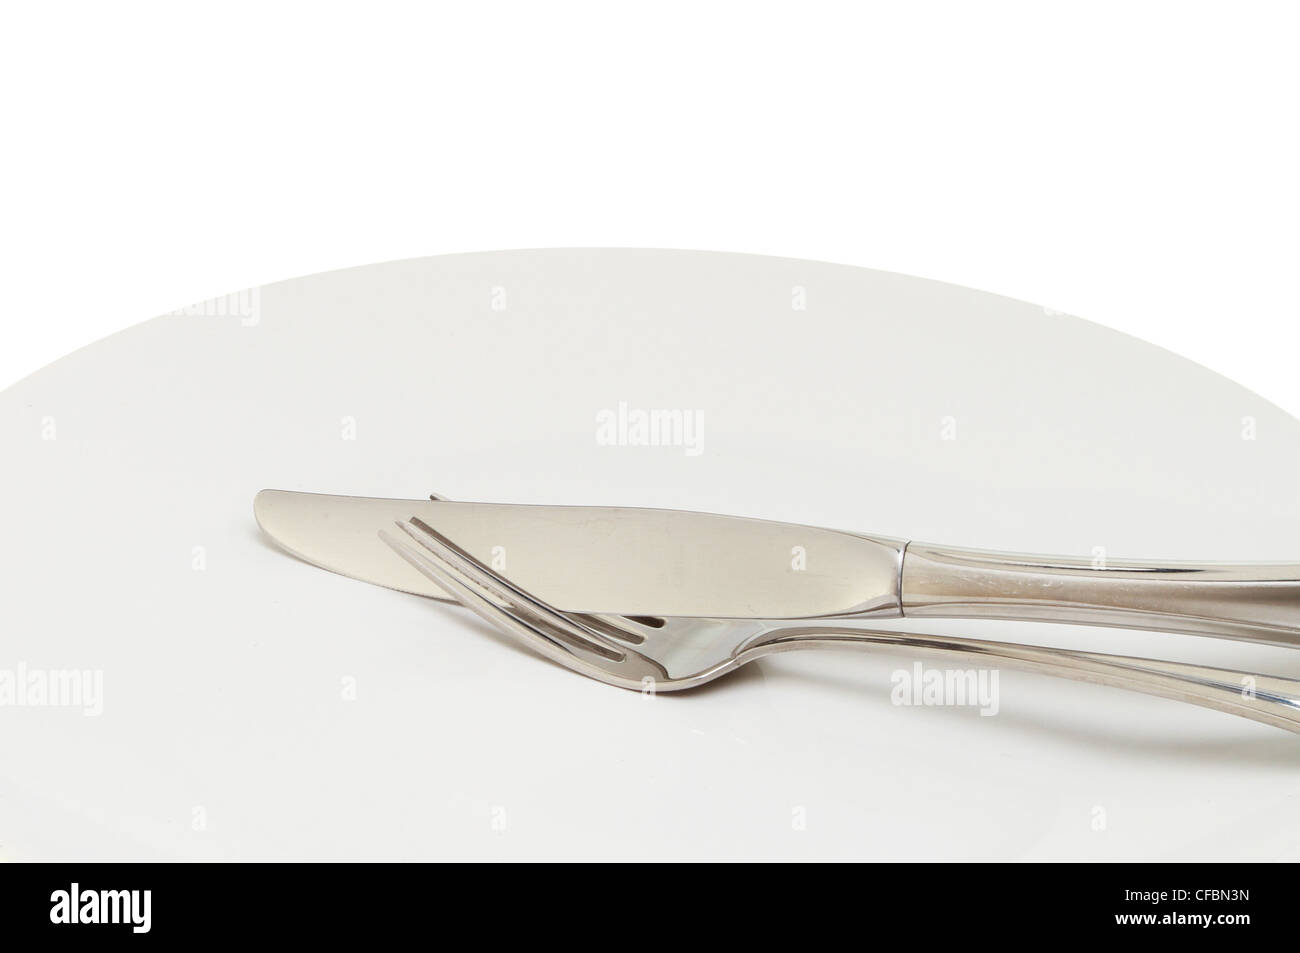 Closeup of a stainless steel knife and fork on a plate Stock Photo